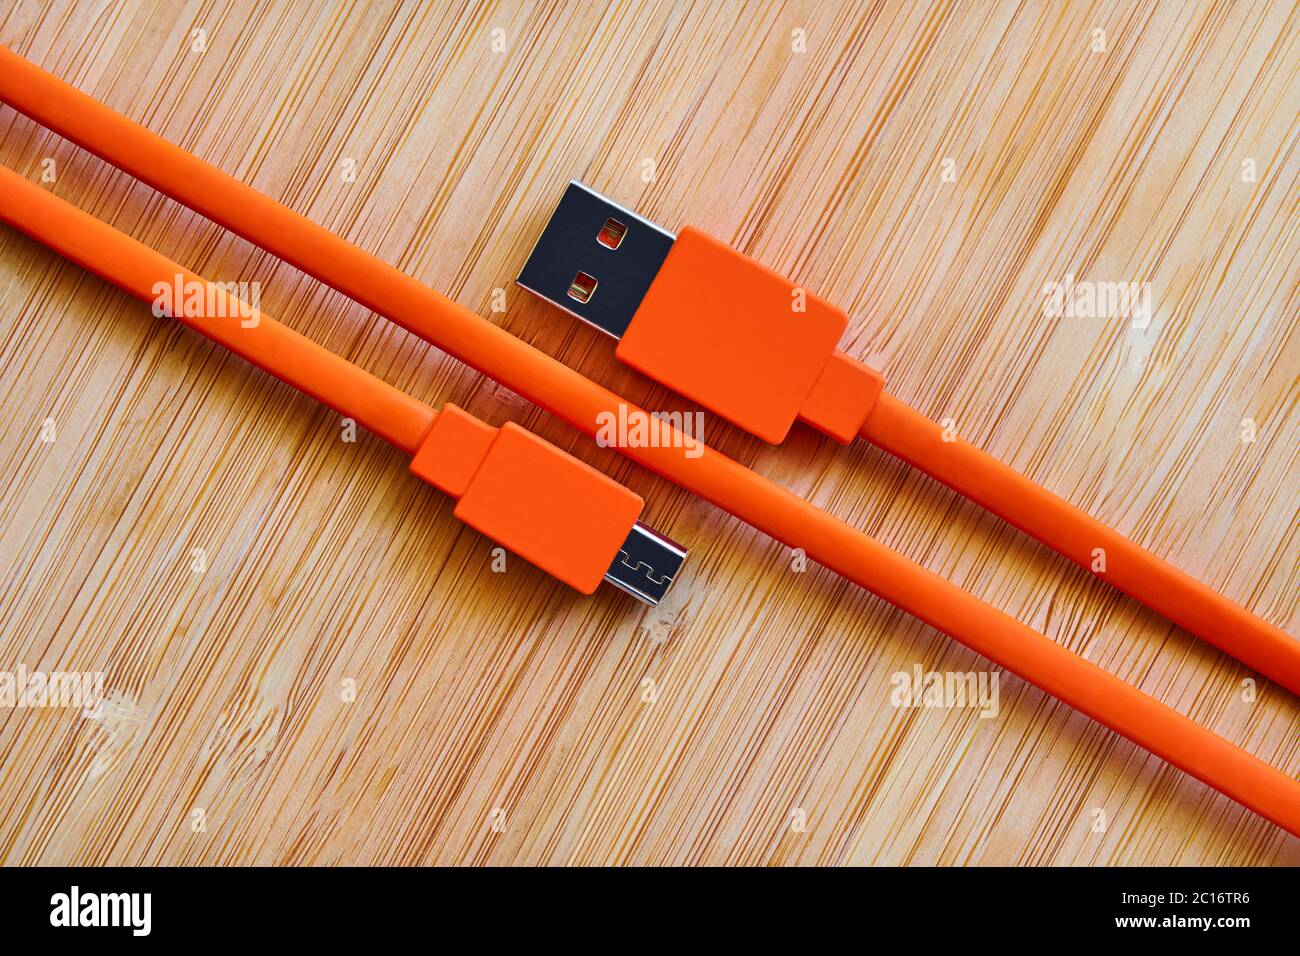 Orange USB cable for gadgets on a wooden background Stock Photo